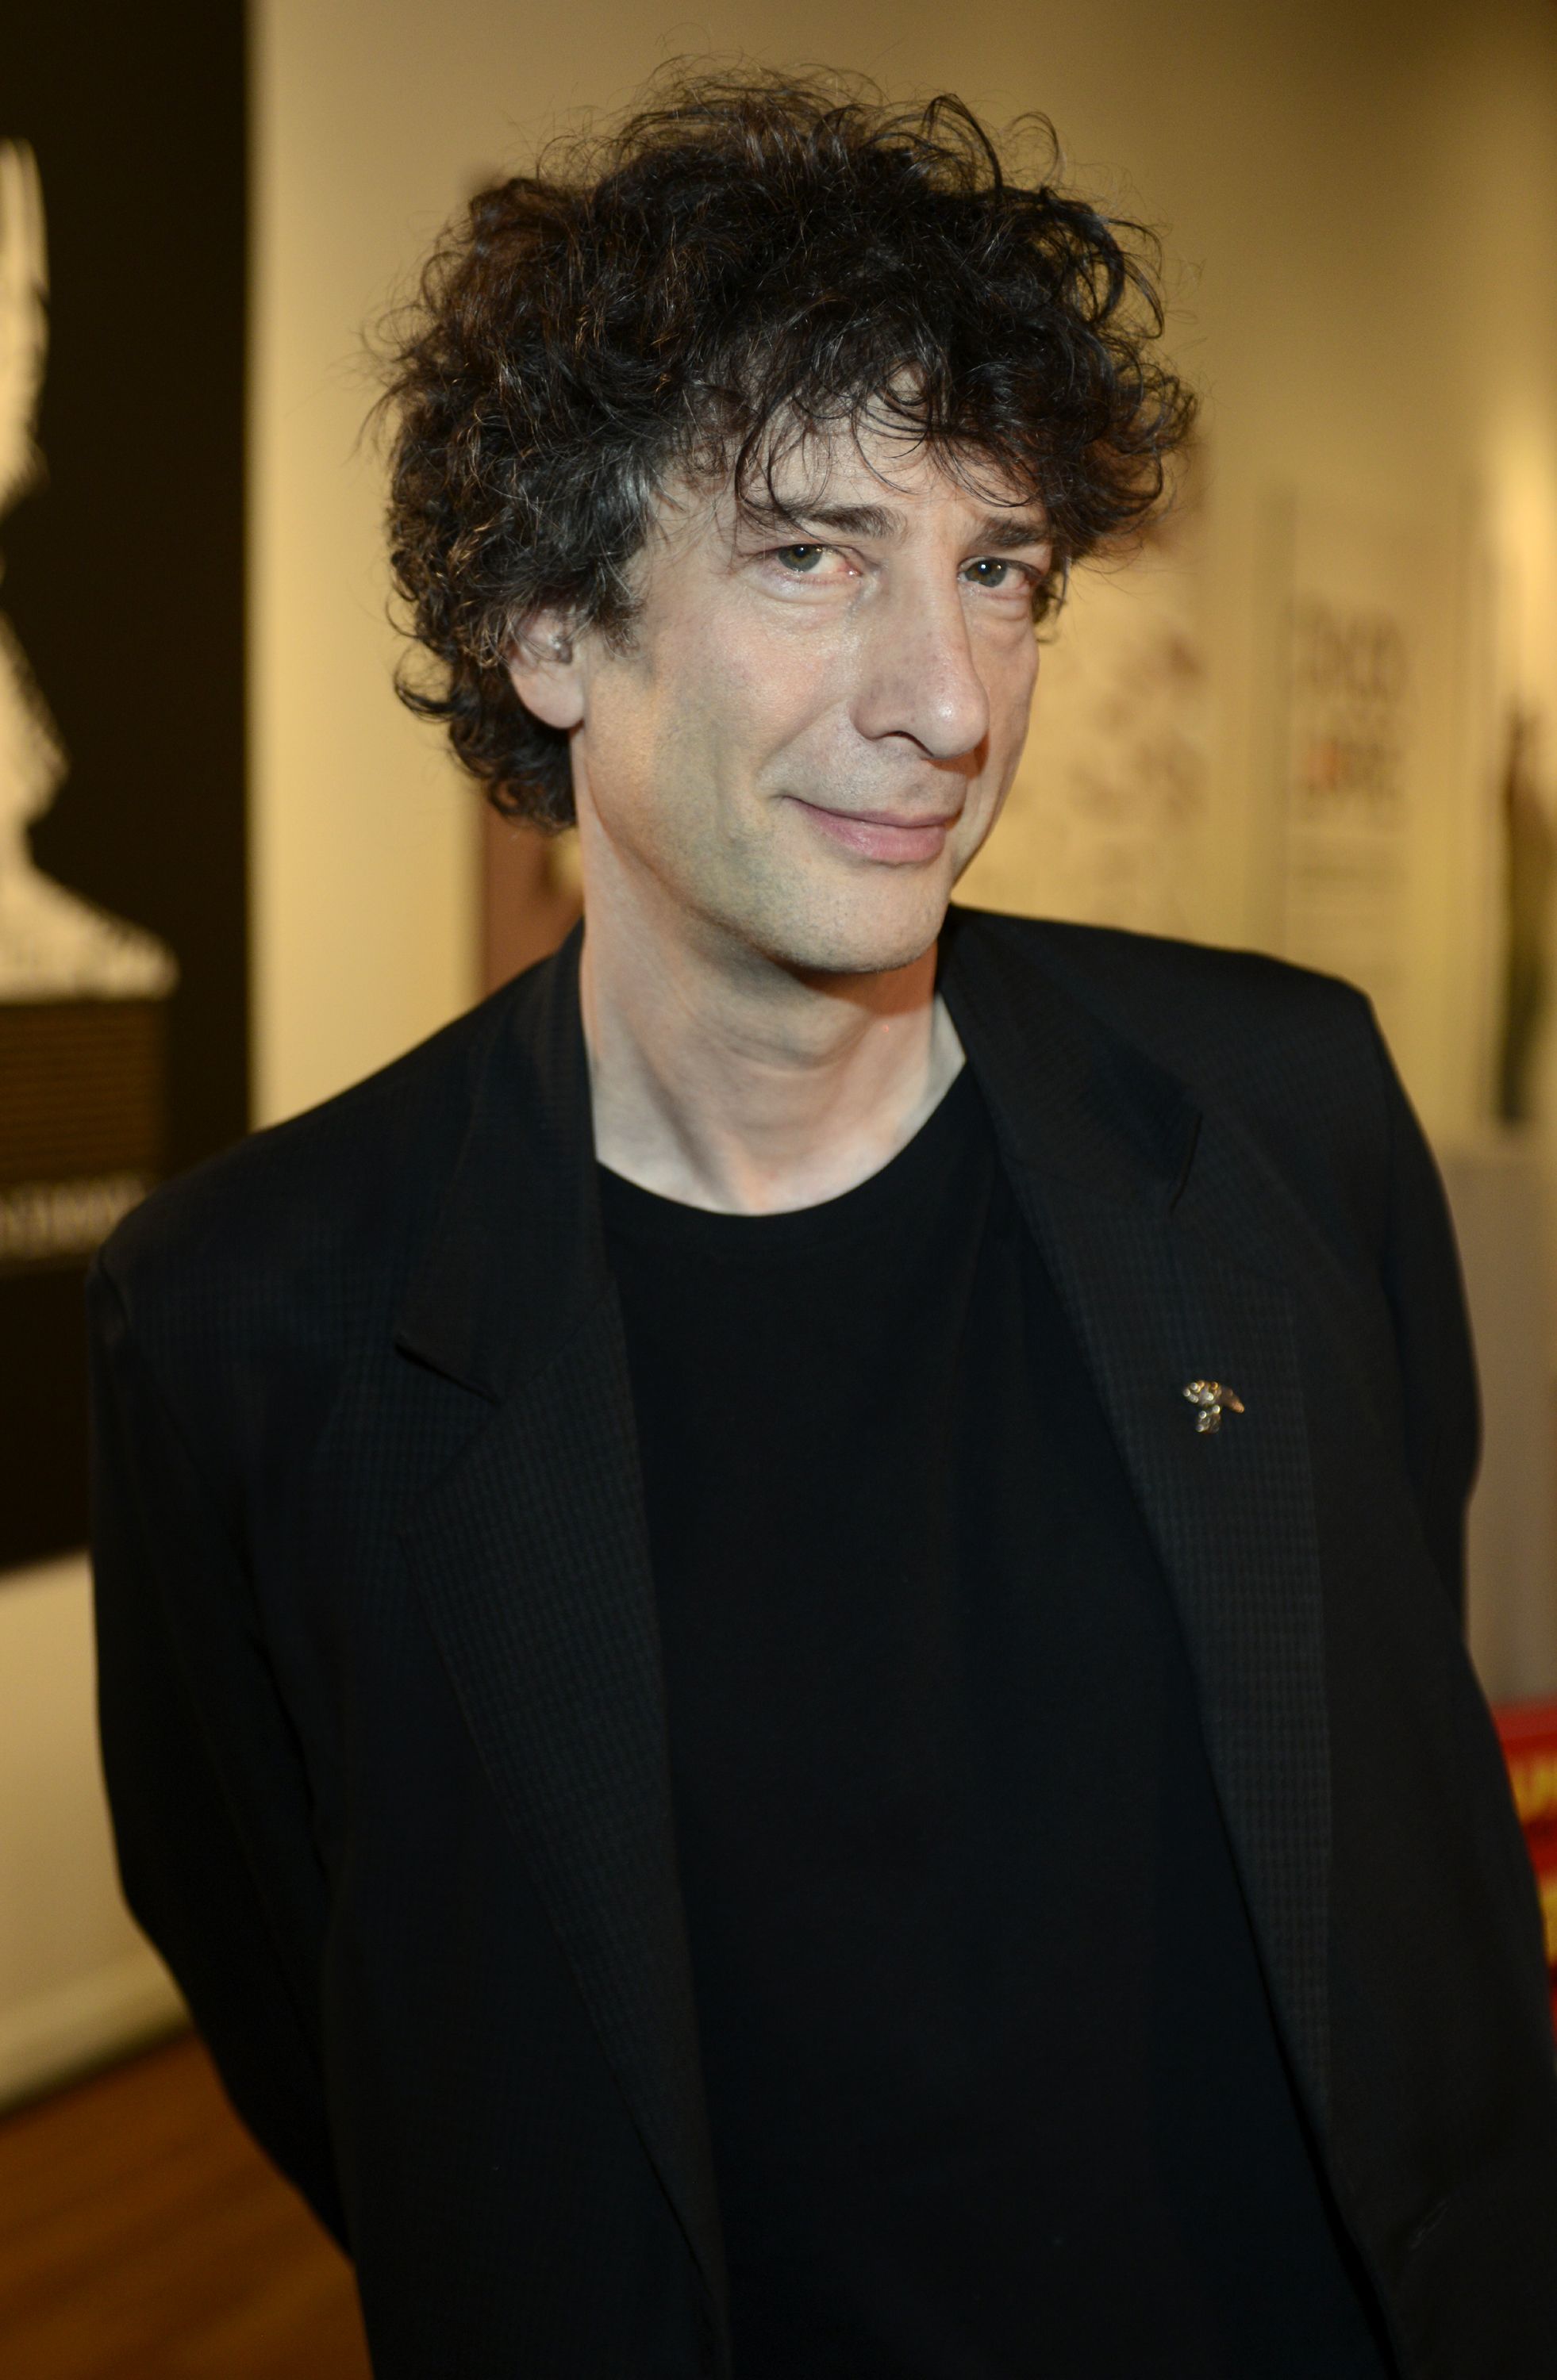 Neil Gaiman 'too busy' for Doctor Who